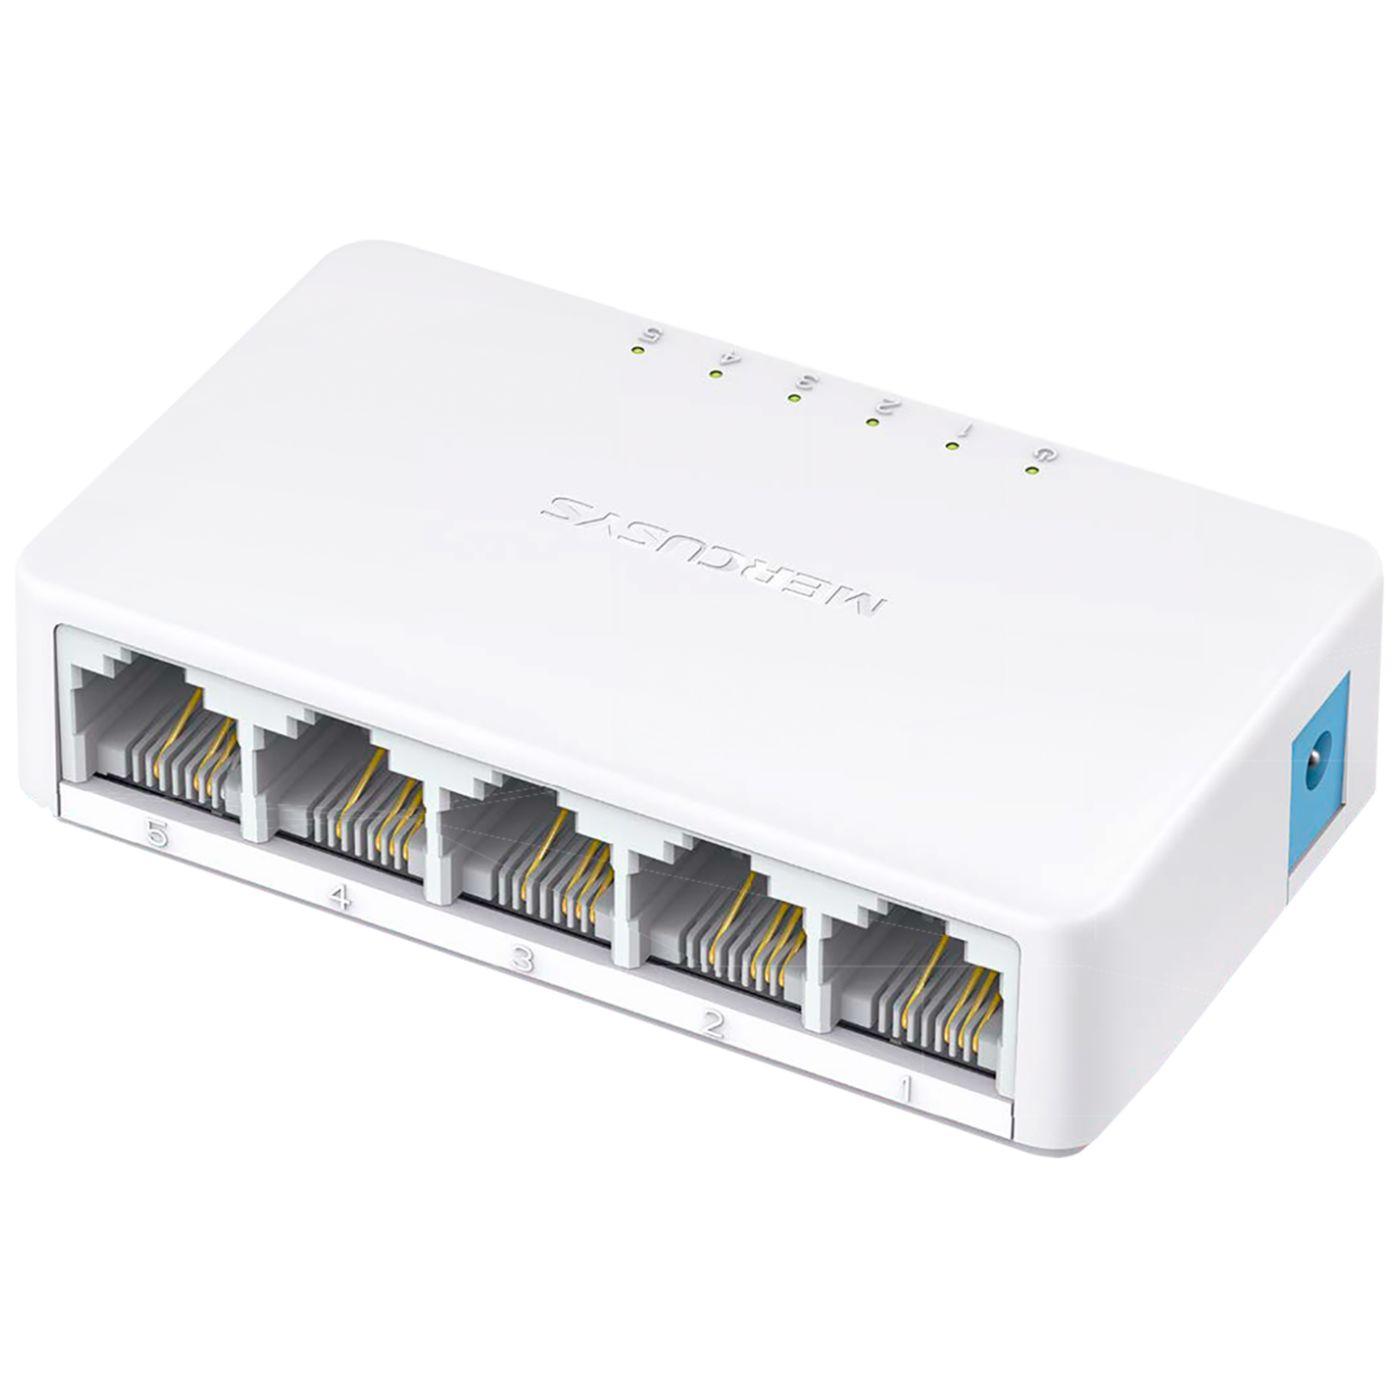 Selected image for MERCUSYS Switch 5-port MS105 beli